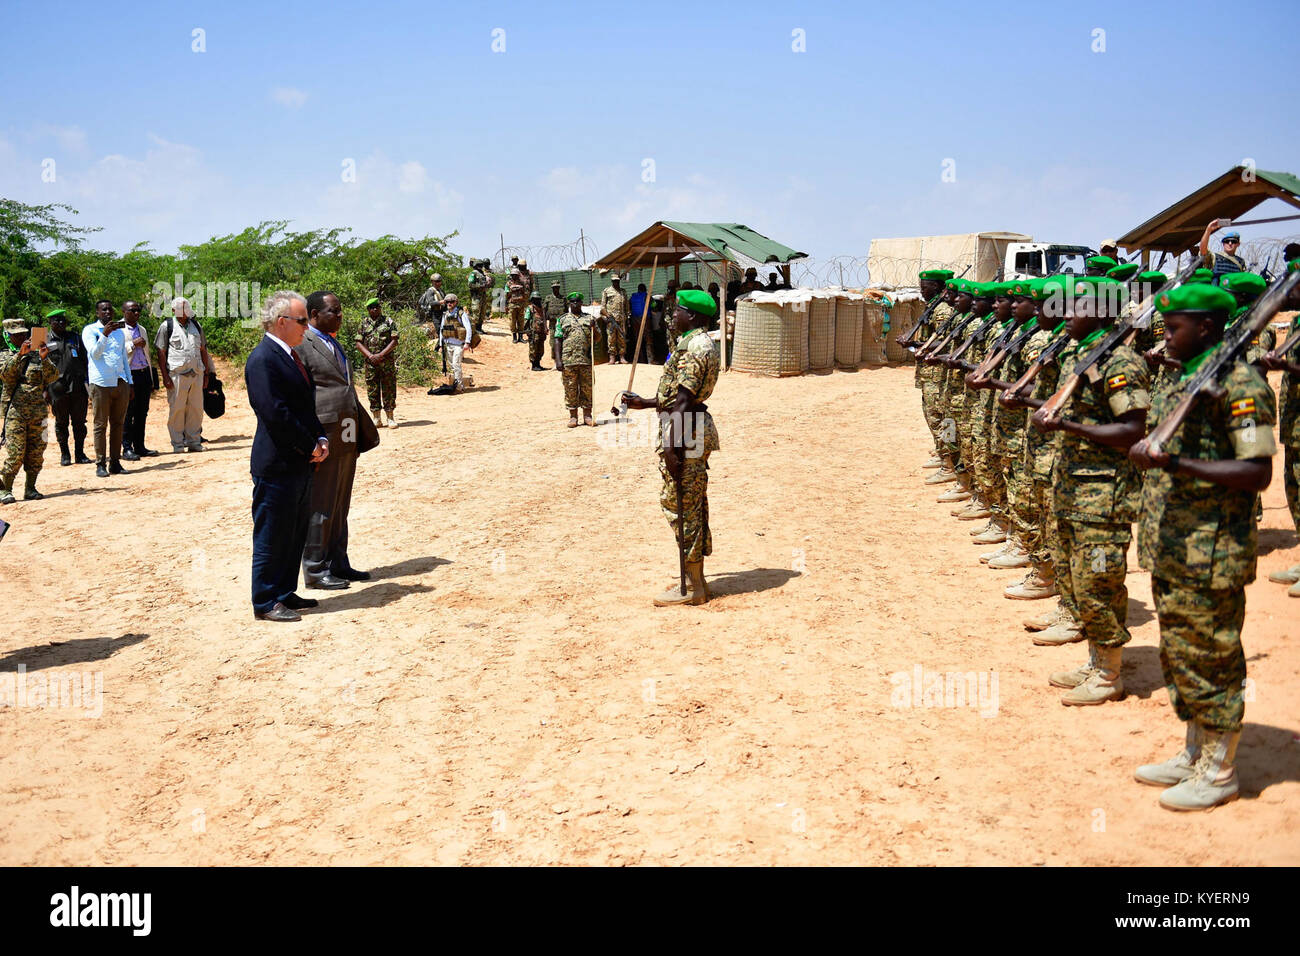 The Special Representative of the Chairperson of the African Union Commission (SRCC) for Somalia, Ambassador Francisco Caetano Madeira and the Special Representative of the UN Secretary-General (SRSG) for Somalia, Michael Keating at a guard parade mounted by soldiers of the Ugandan contingent serving under the African Union Mission in Somalia (AMISOM). The two officials were on a working visit to Barawe, Lower Shabelle region on November 15, 2017. AMISOM Photo / Raymond Baguma Stock Photo